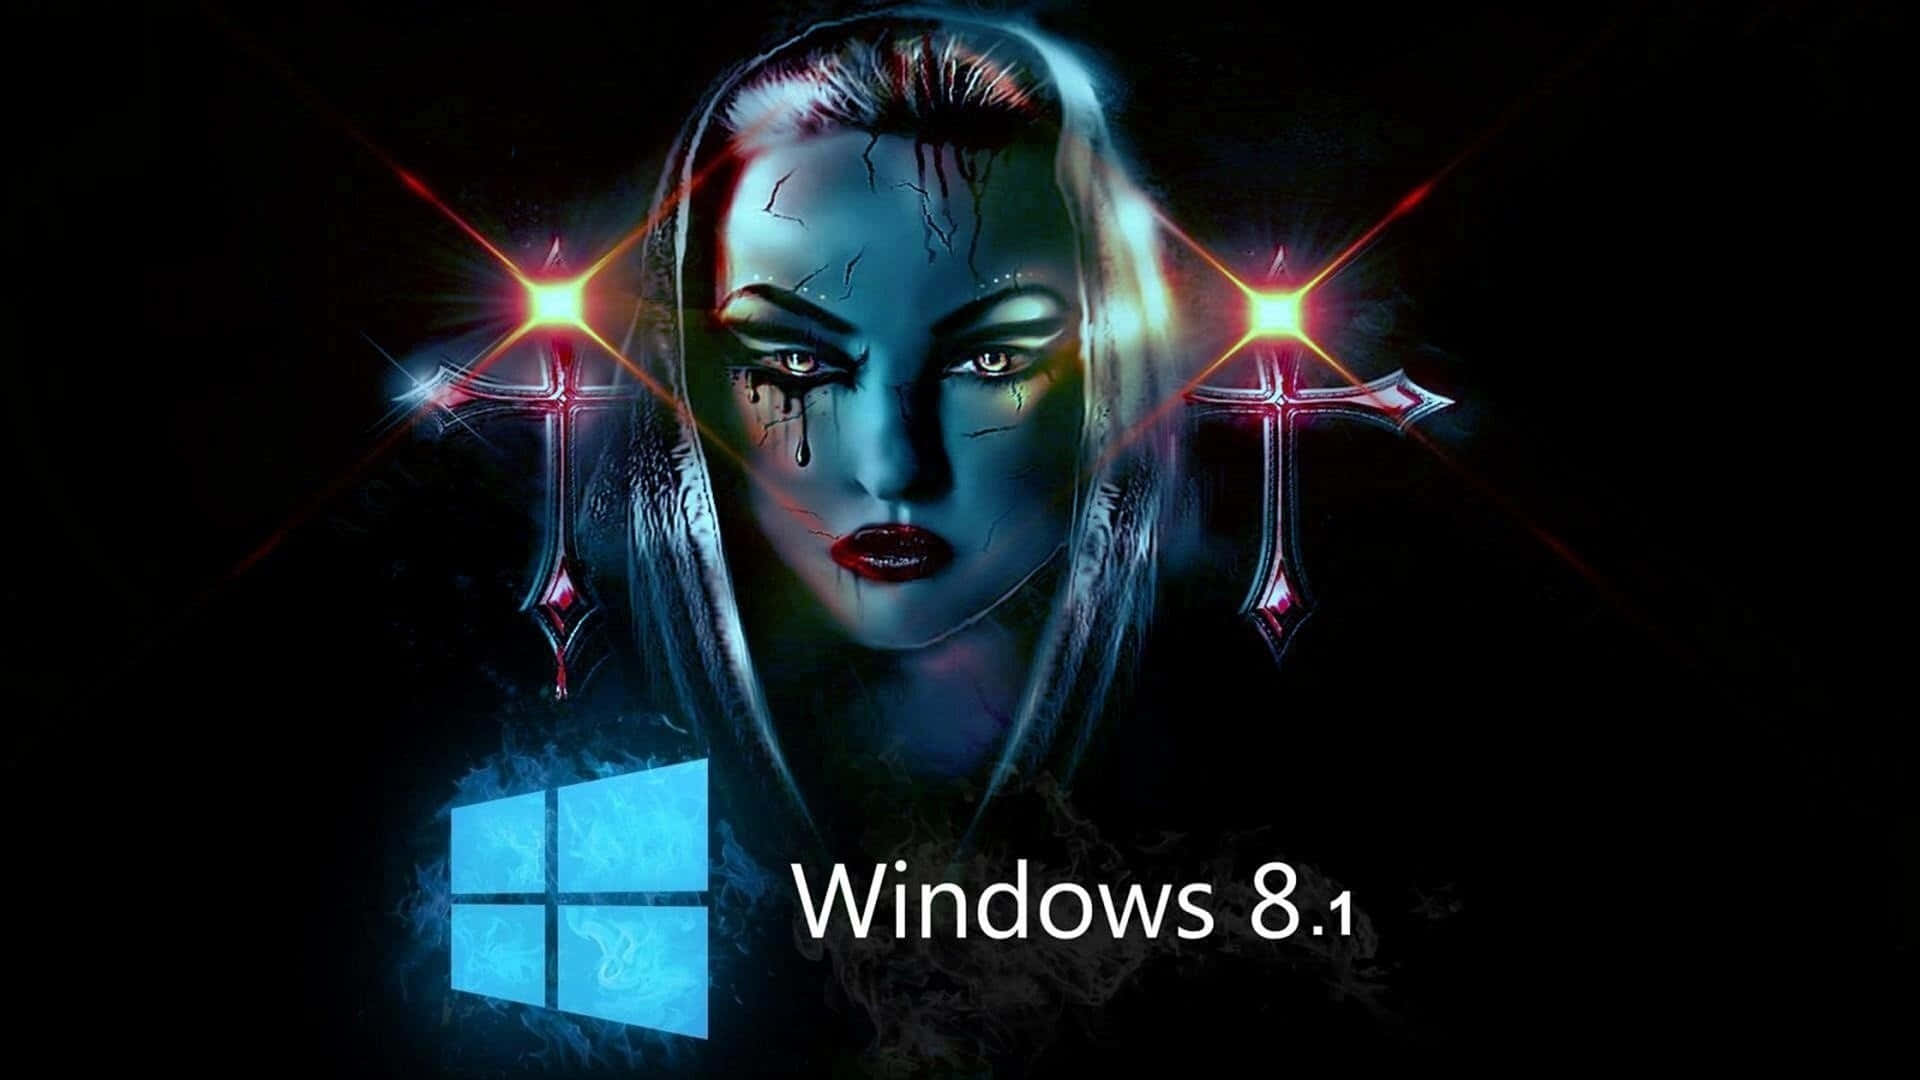 Windows 8 1 - A Woman With A Sword And A Cross